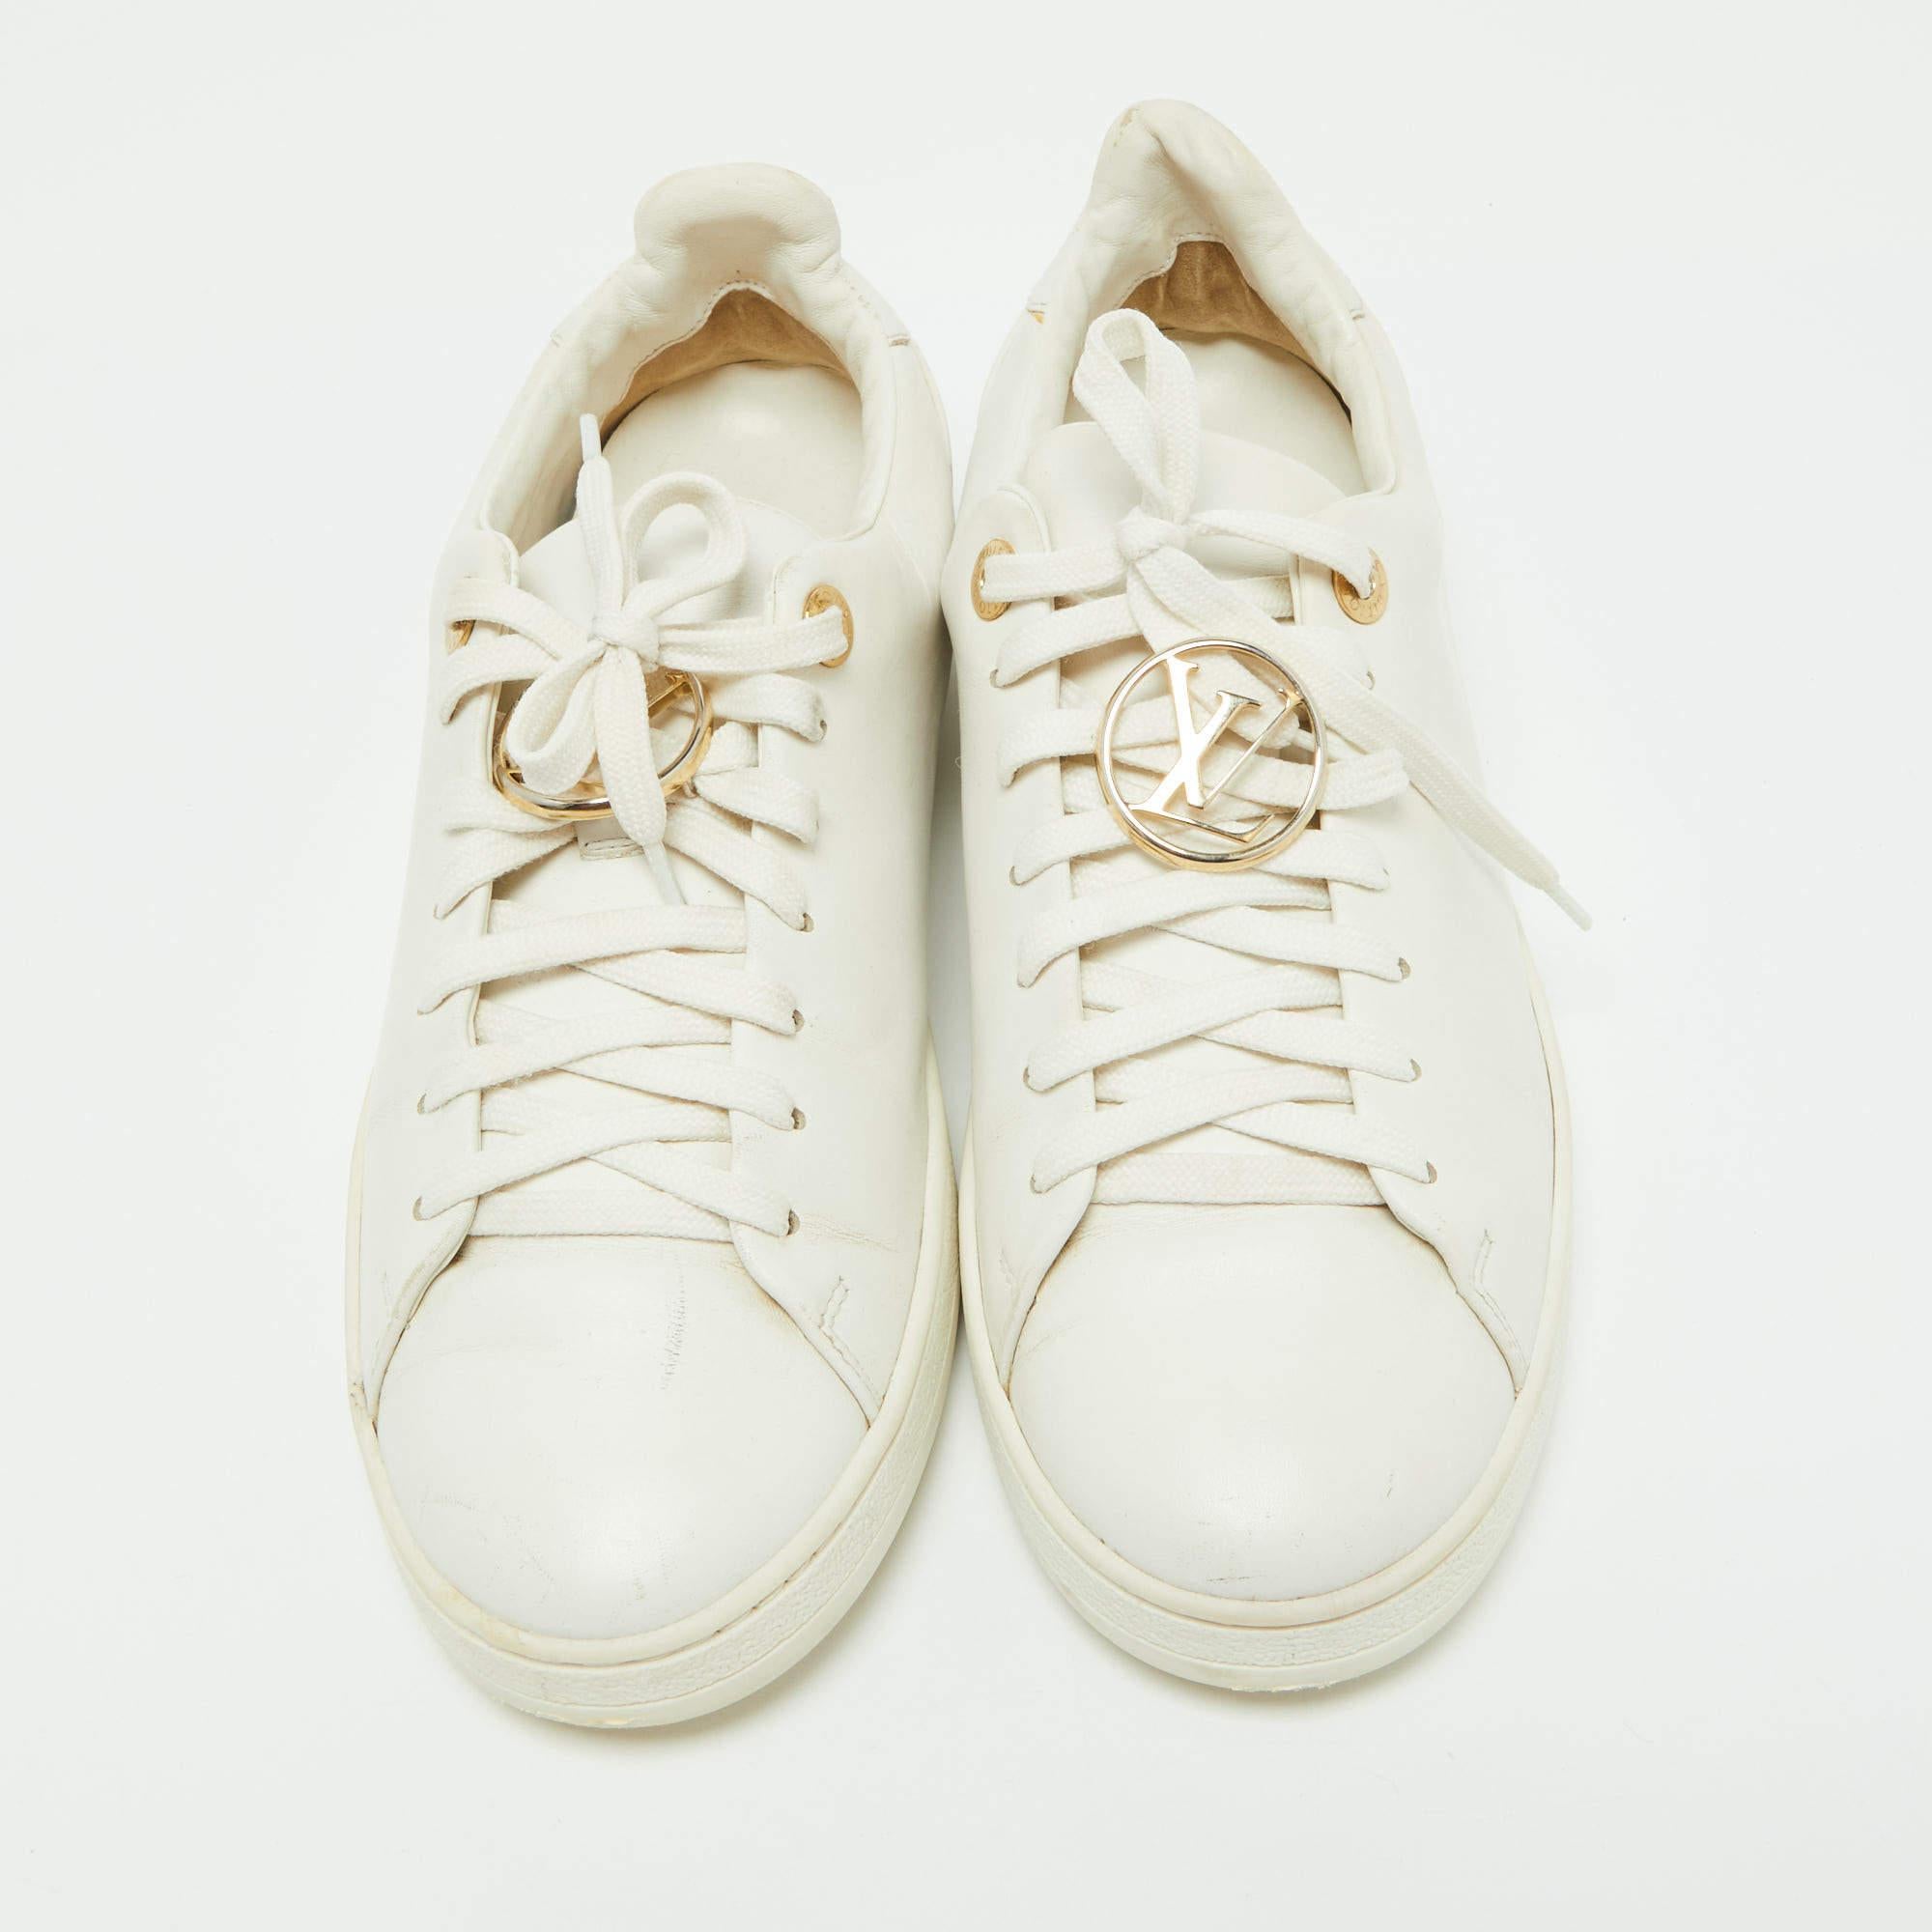 These Louis Vuitton sneakers are the ultimate step-up to bring style and attitude to your look. They are crafted from leather and have a lovely white color. They have lace-ups and durable rubber soles. They'll look super-chic with most casual